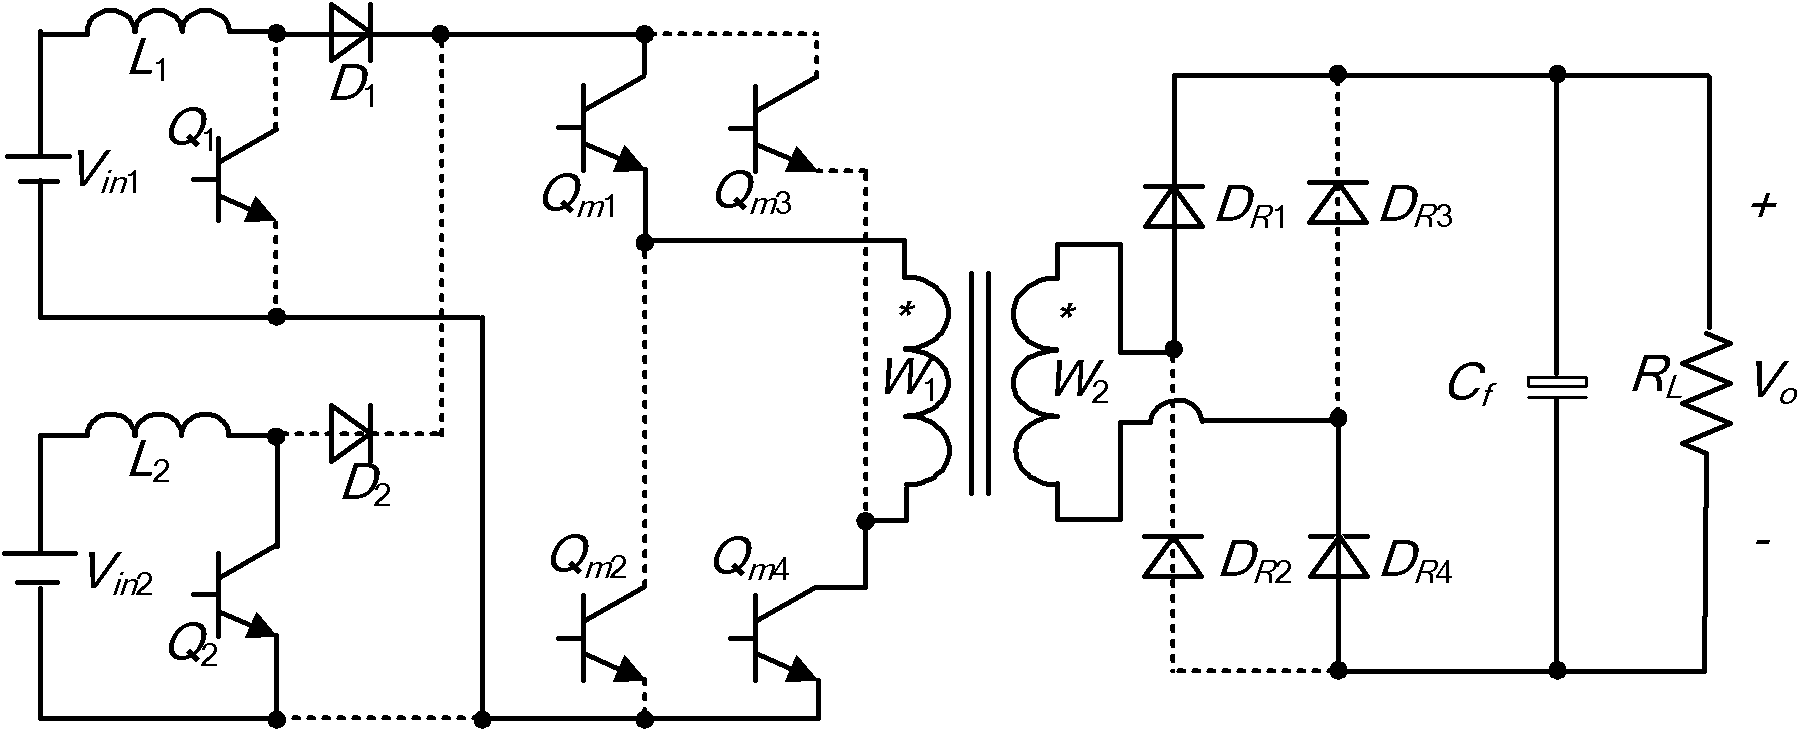 Current-source-type multi-input full-bridge converter with single primary winding